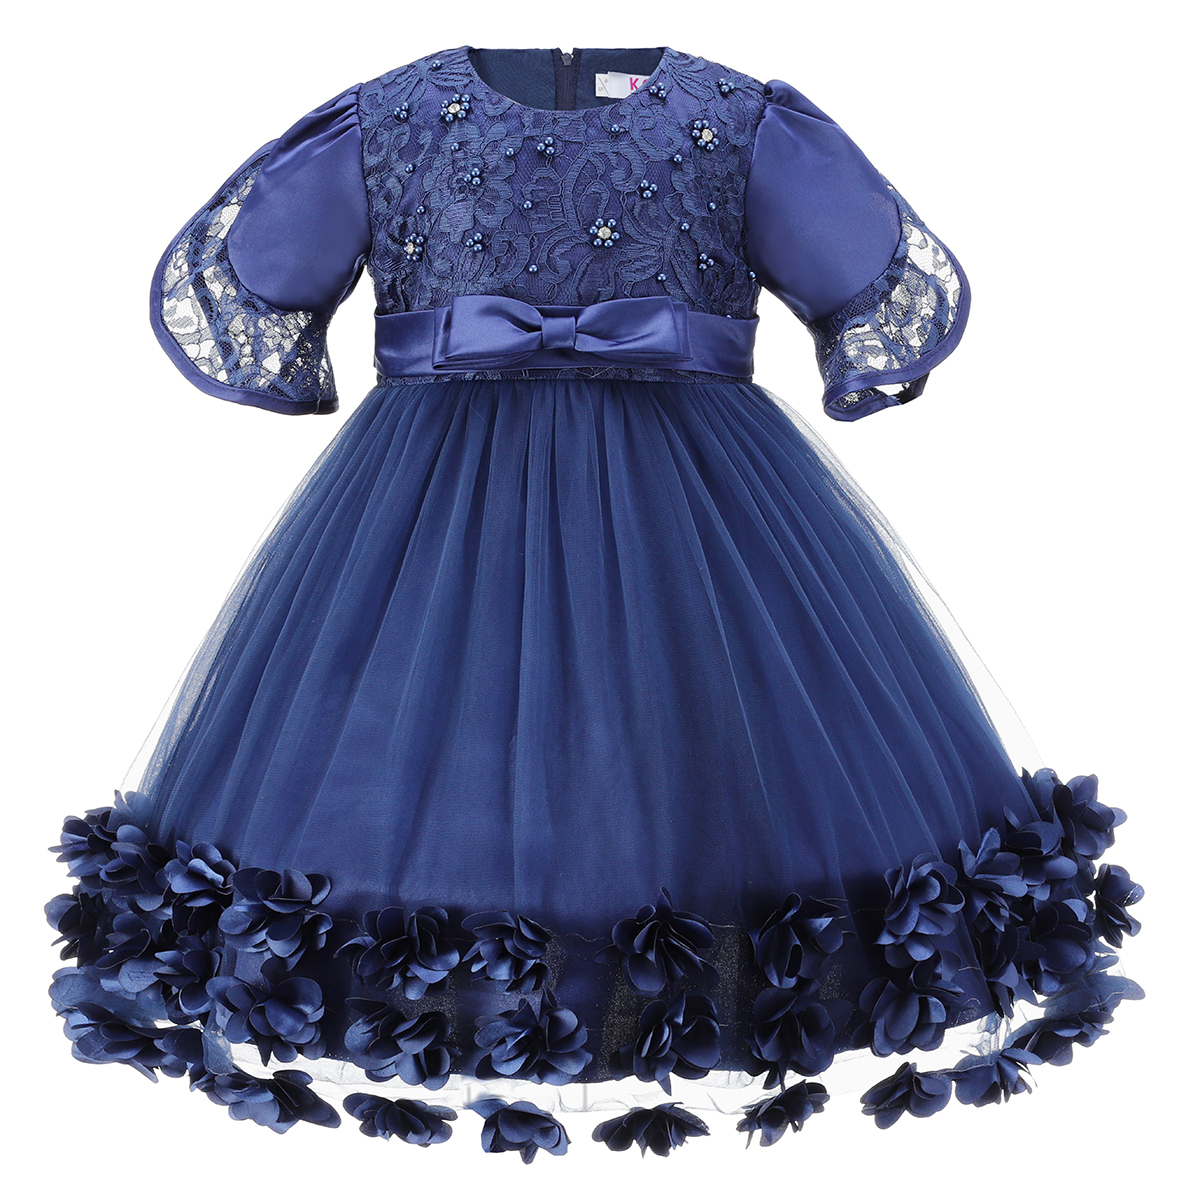 Navy Laced Floral Applique Bow Dress